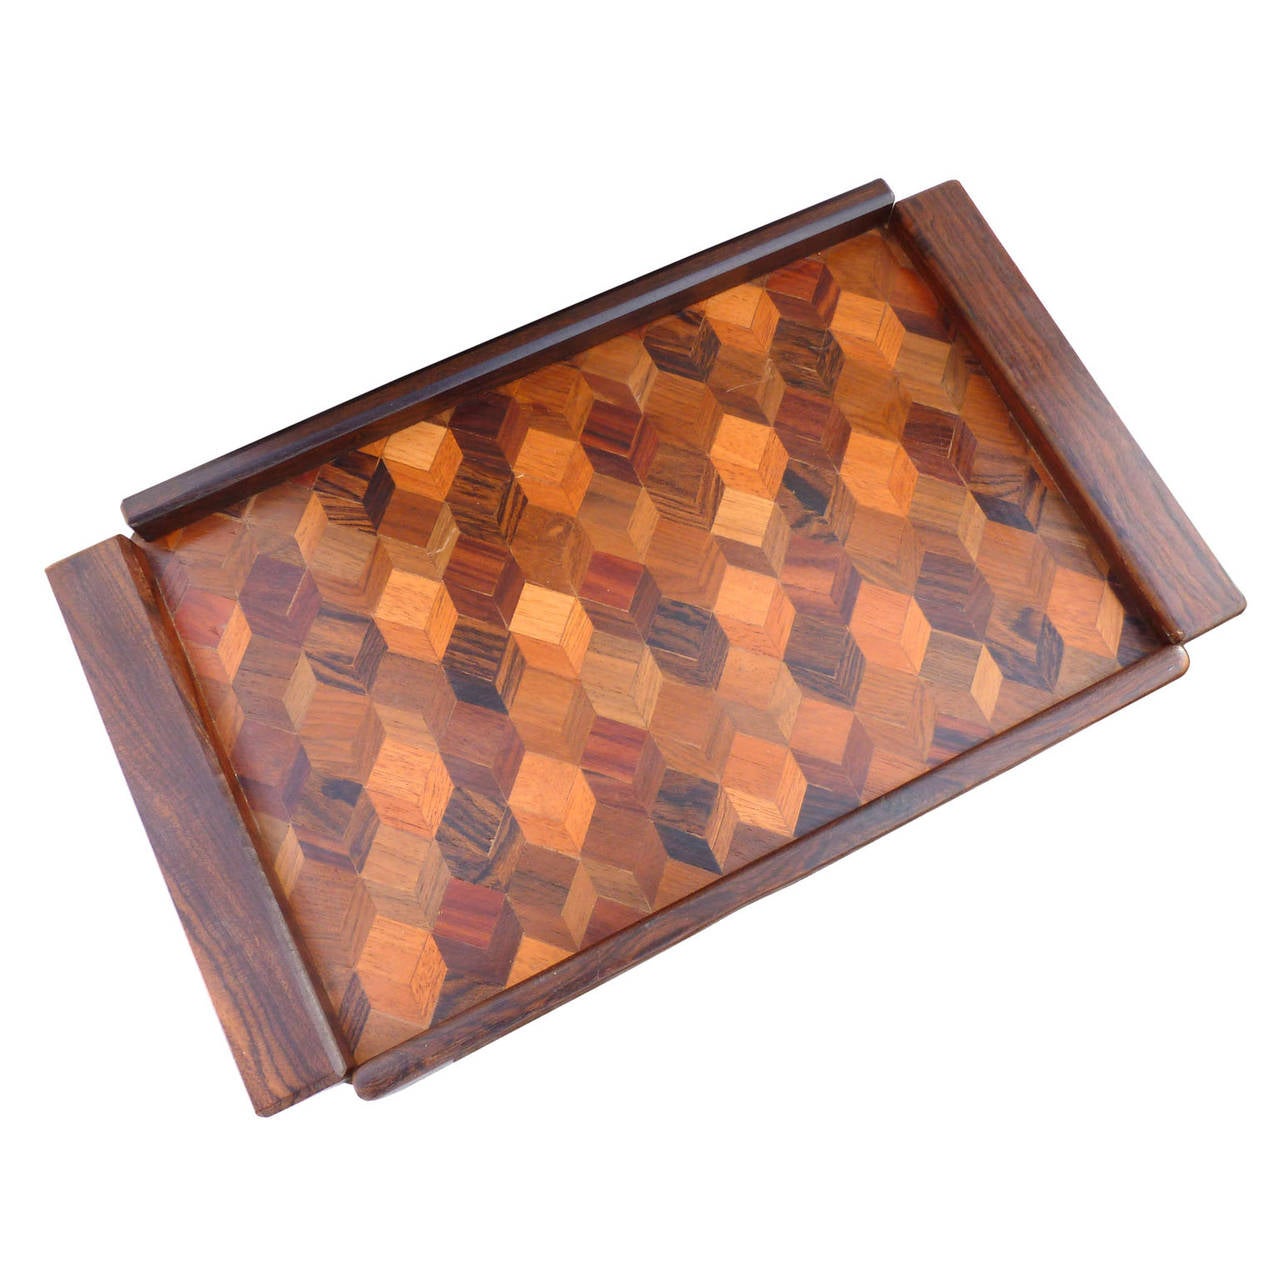 Mid-Century Modern Don Shoemaker Parquetry Service Tray, Made in Tropical Woods